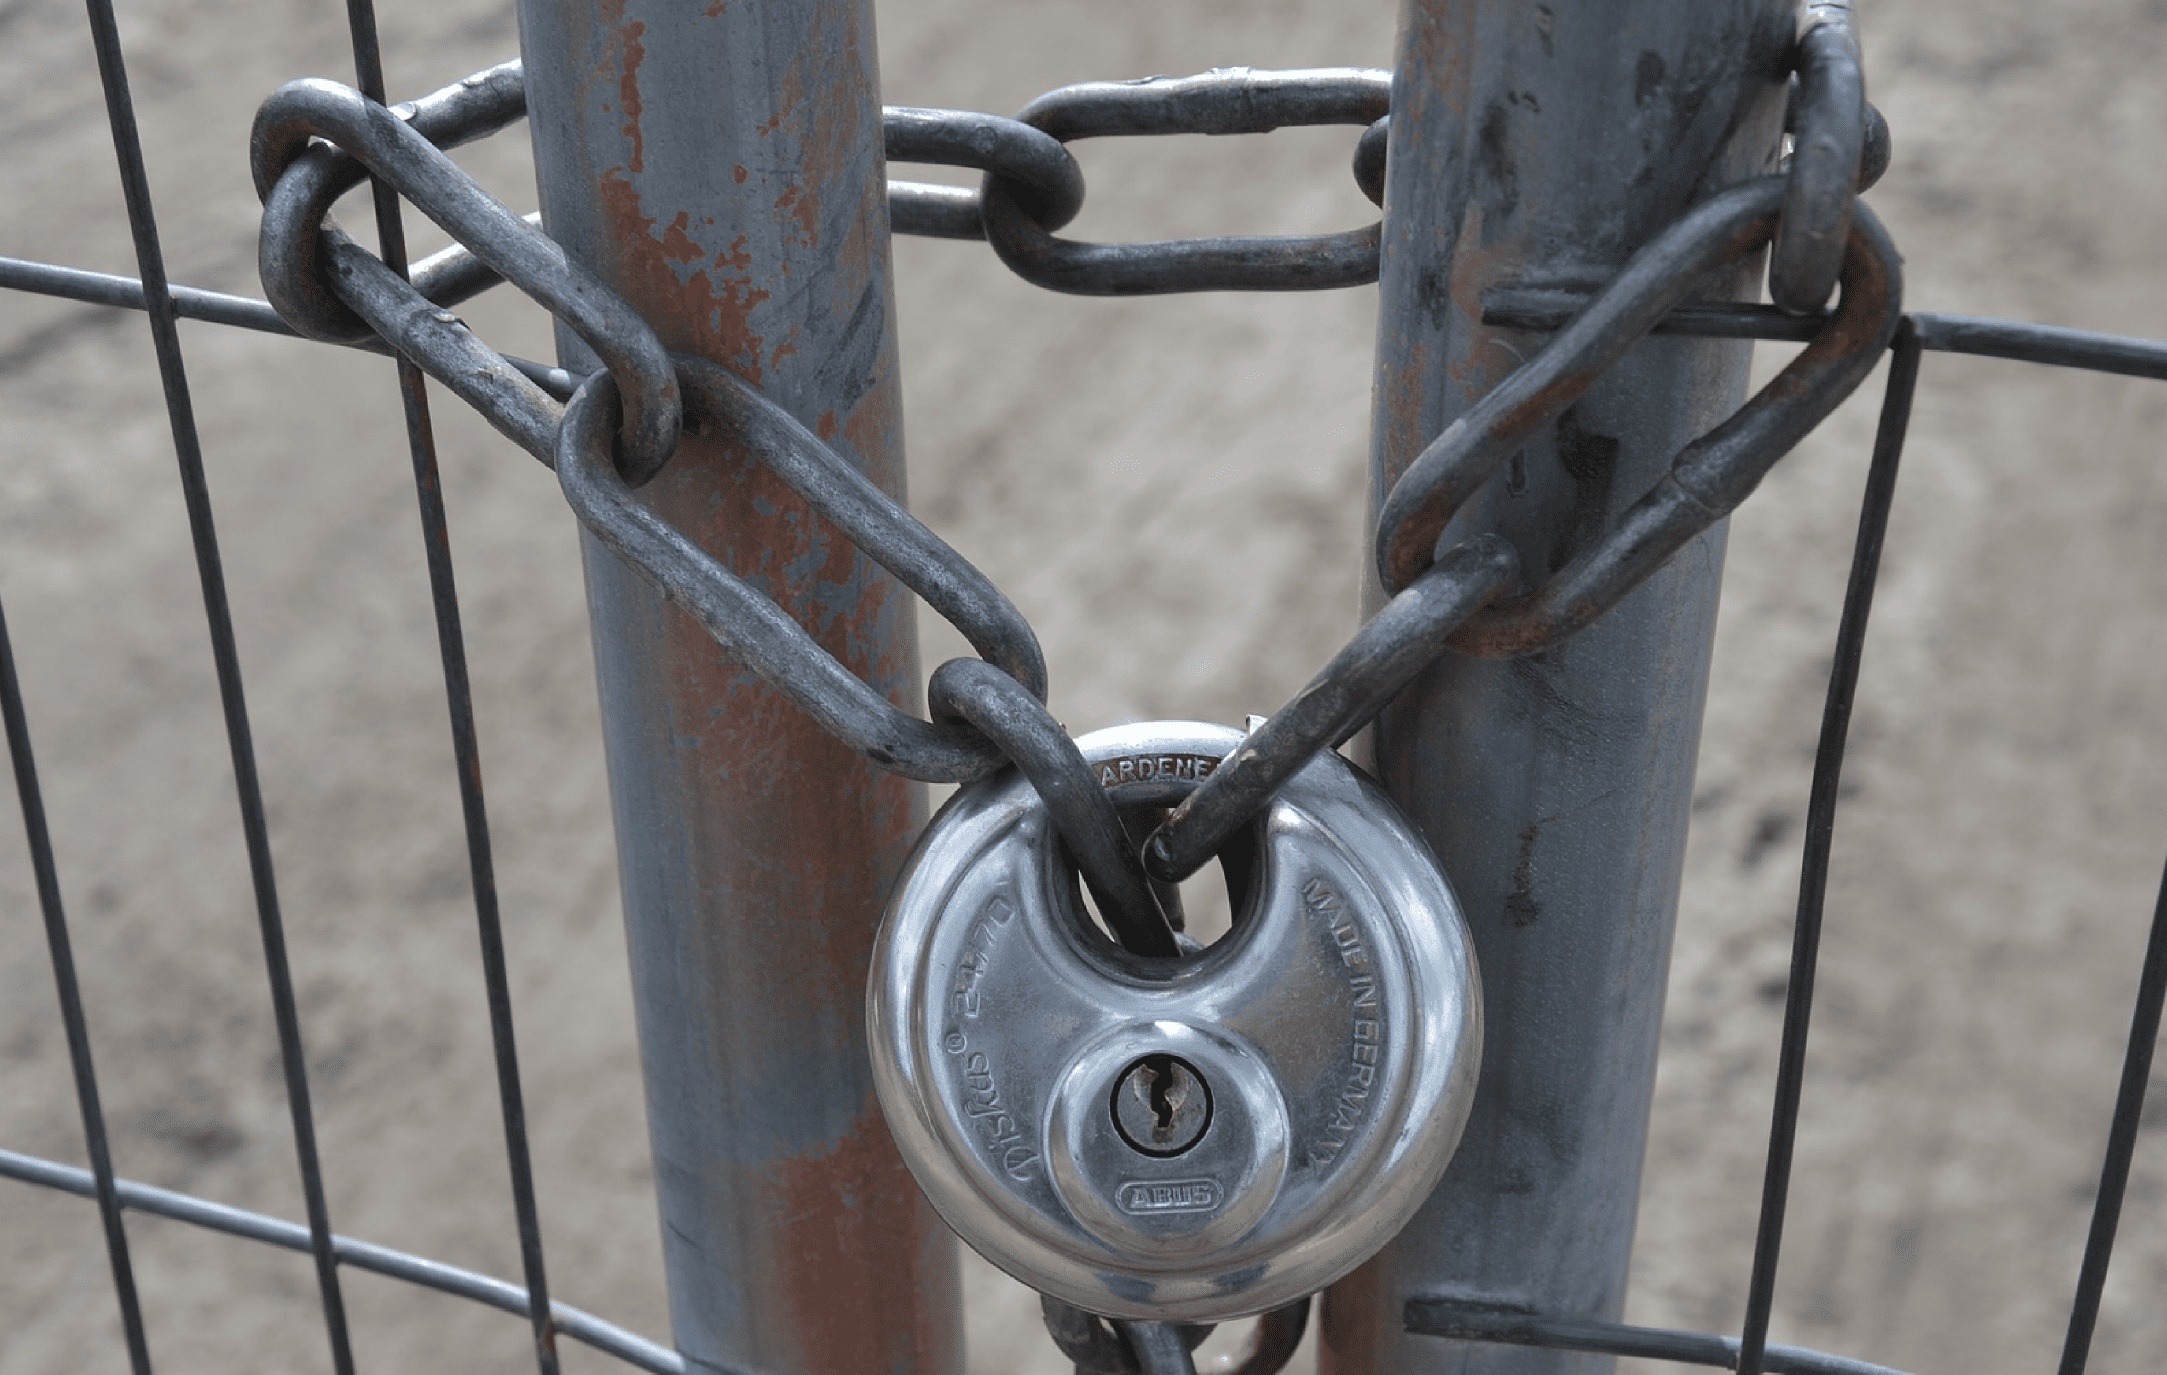 A chain link looped through a fence an secured by a lock